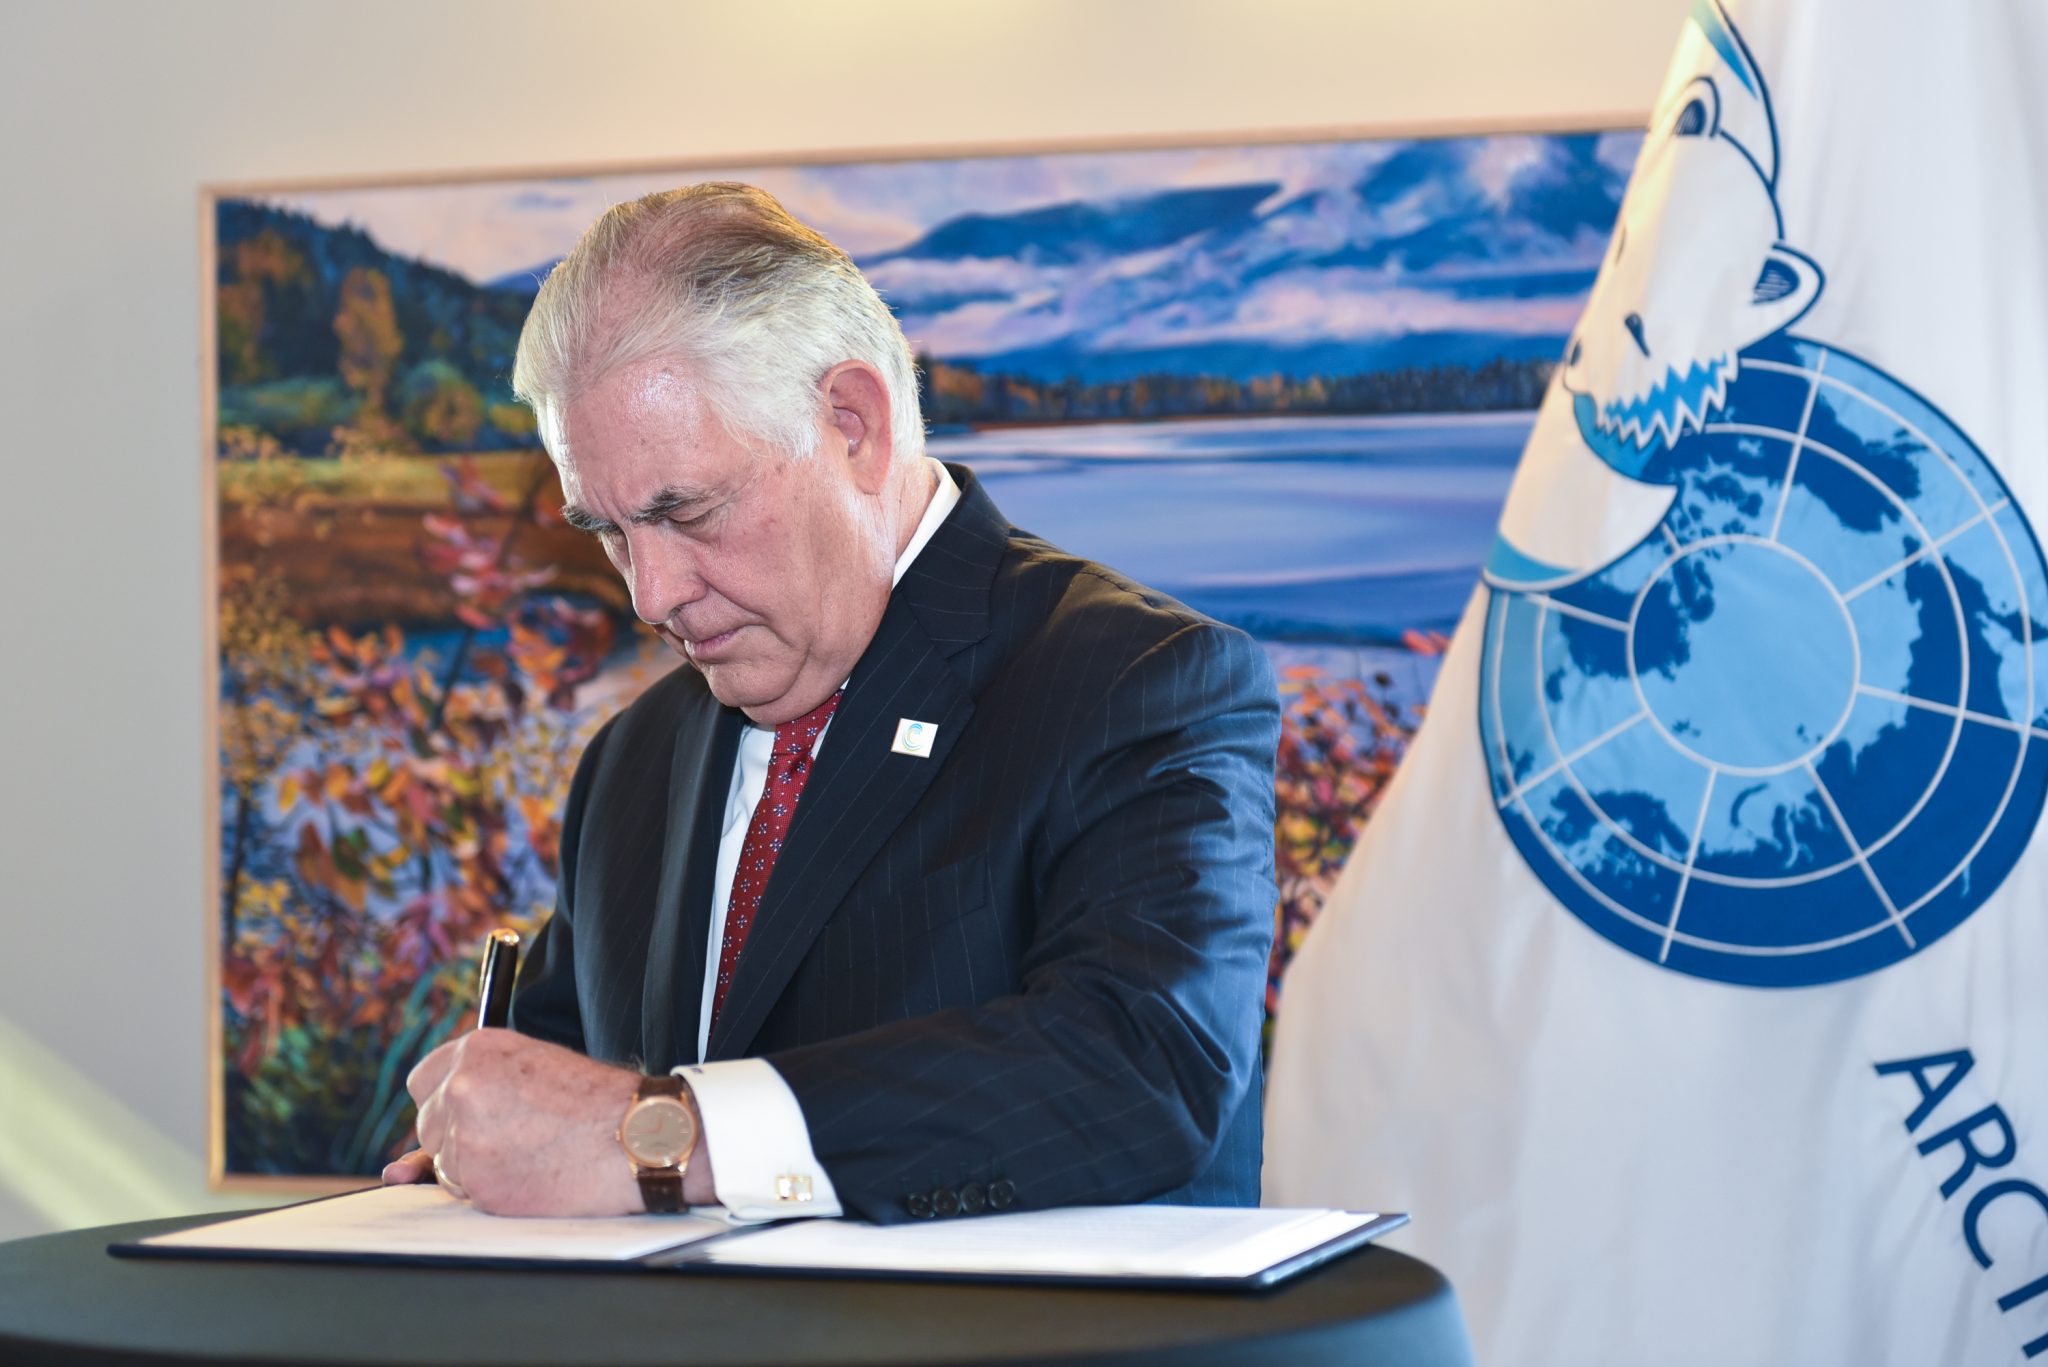 US President Donald Trump's first secretary of state, Rex Tillerson, signs an Arctic Council declaration that mentioned climate change nine times. Credit: Arctic Council Secretariat/Linnea Nordstrom. CC BY-ND 4.0.